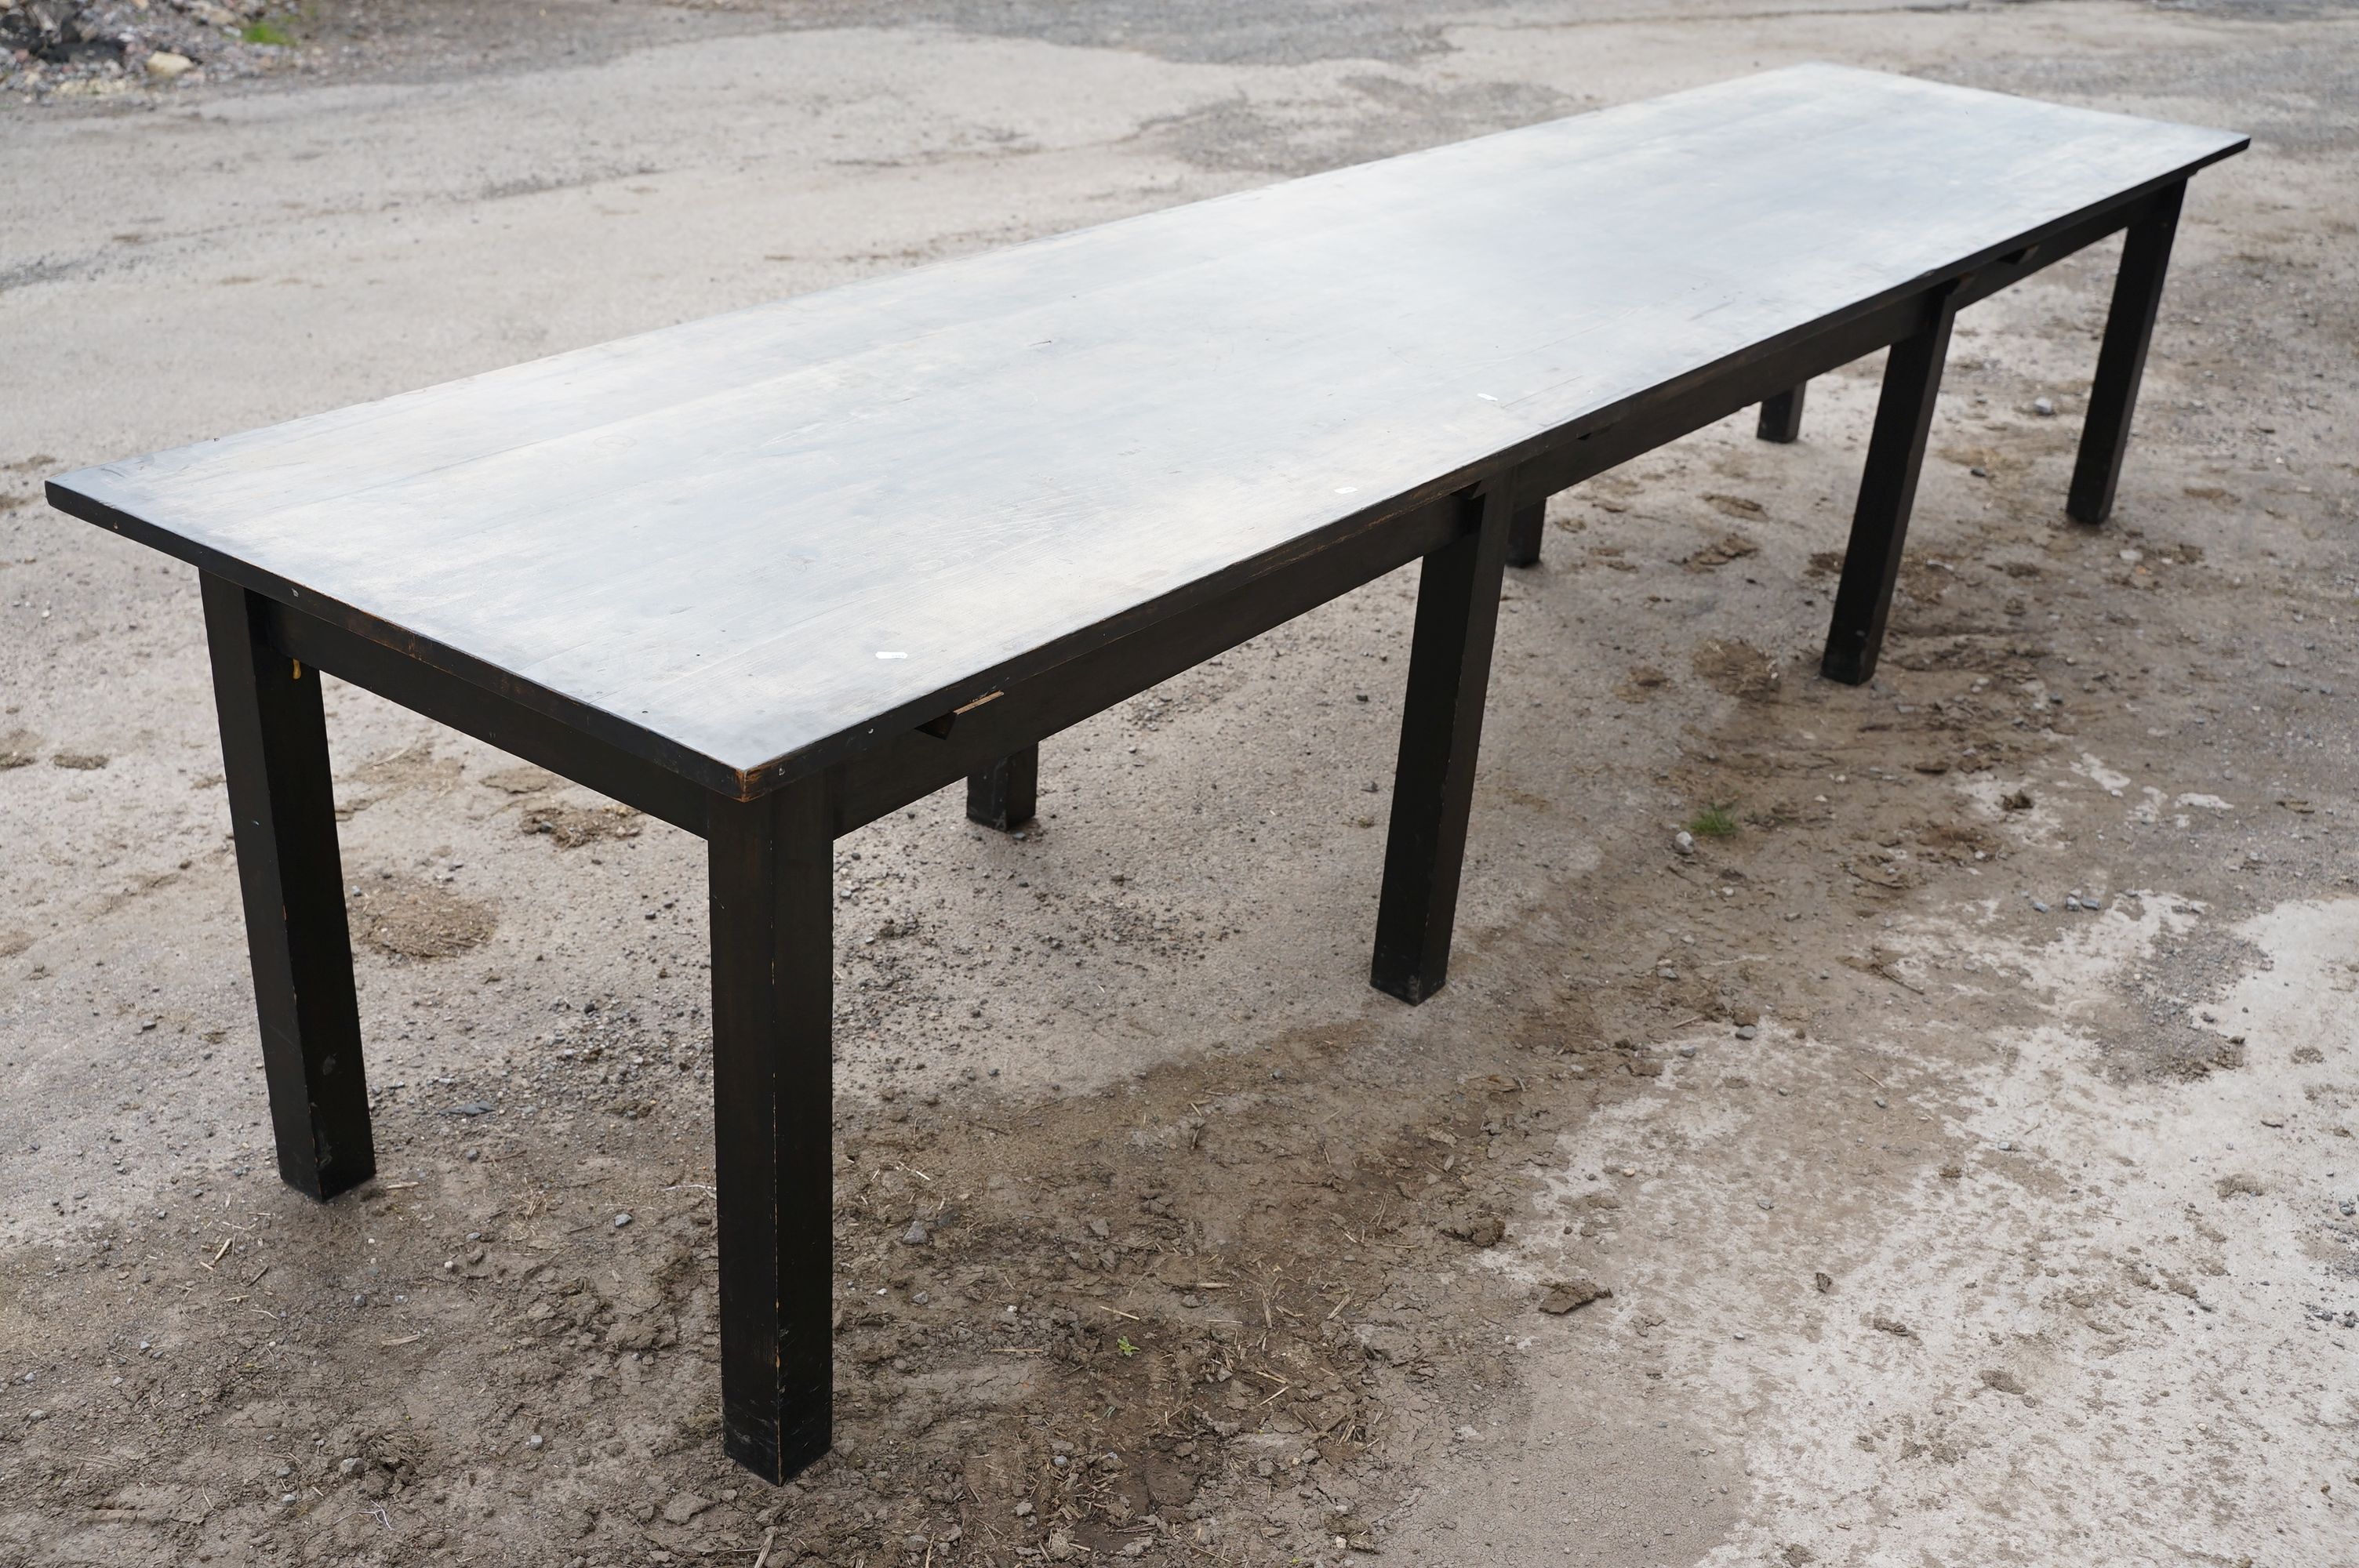 Very large dining table, with maple top and beech legs, approx 400cm long x 90cm wide